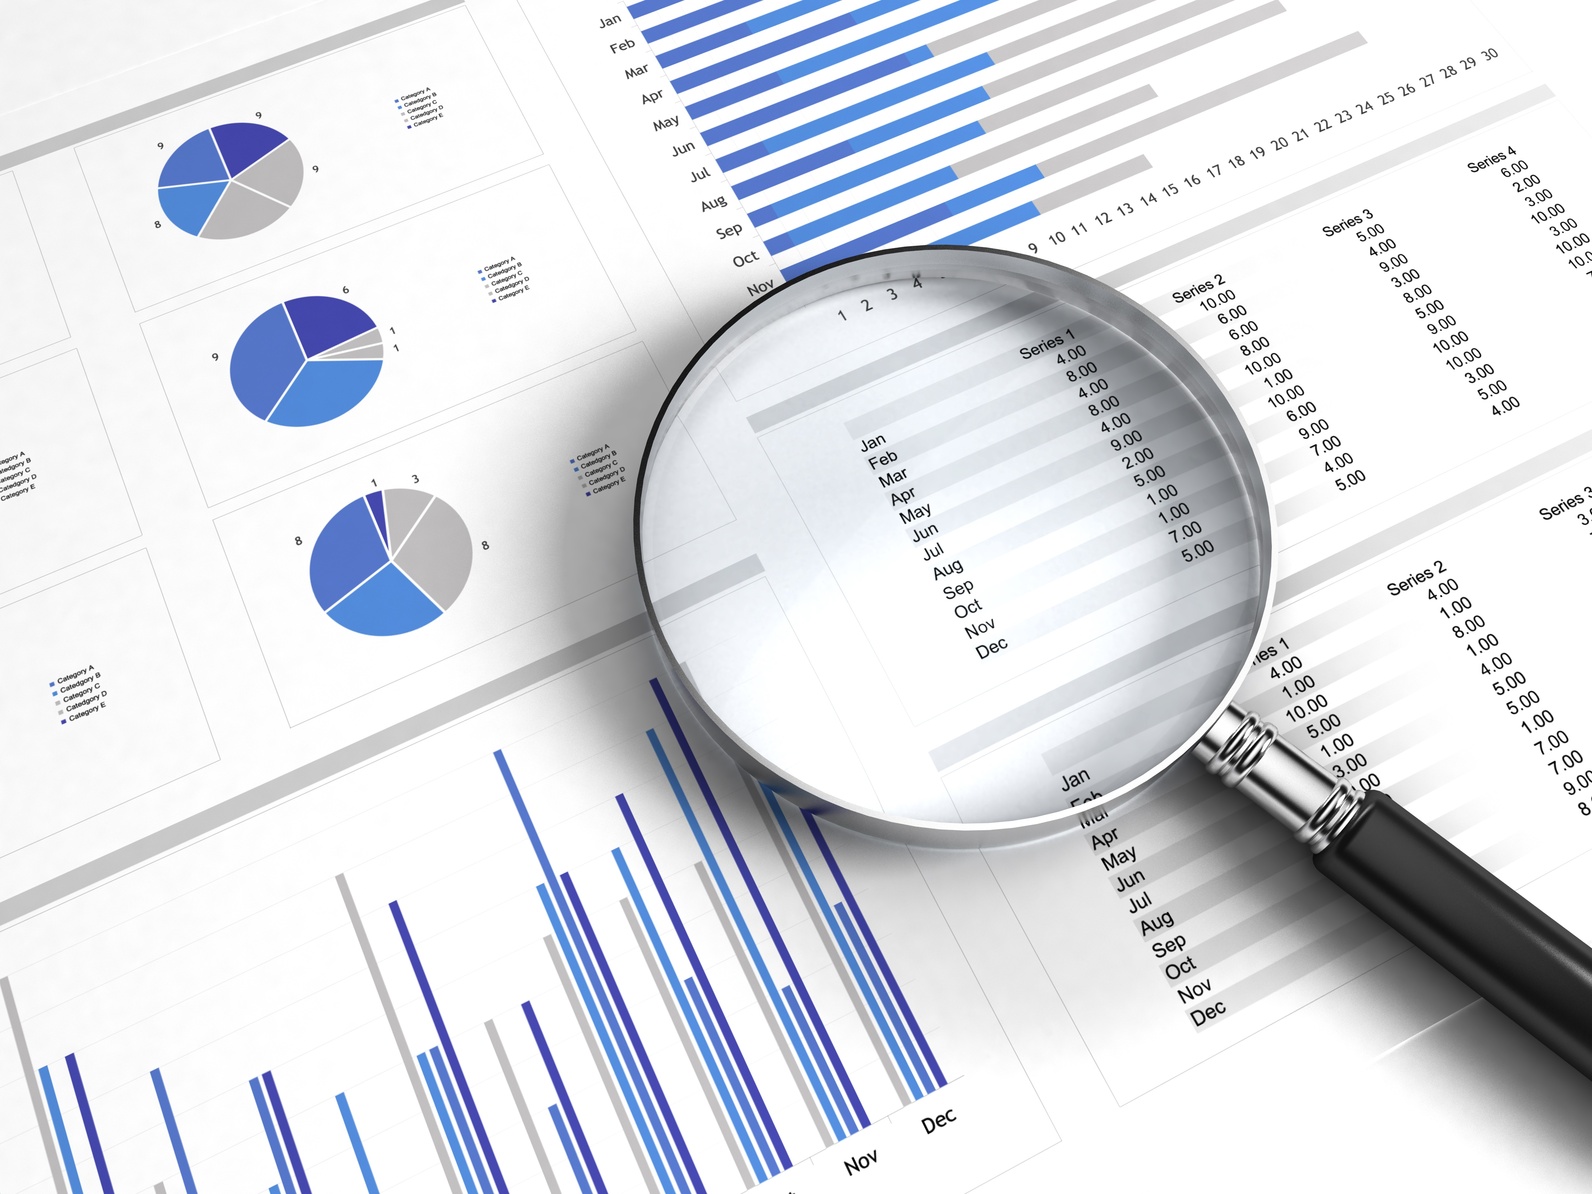 Business valuation magnifying glass 1  56fd523d926a4